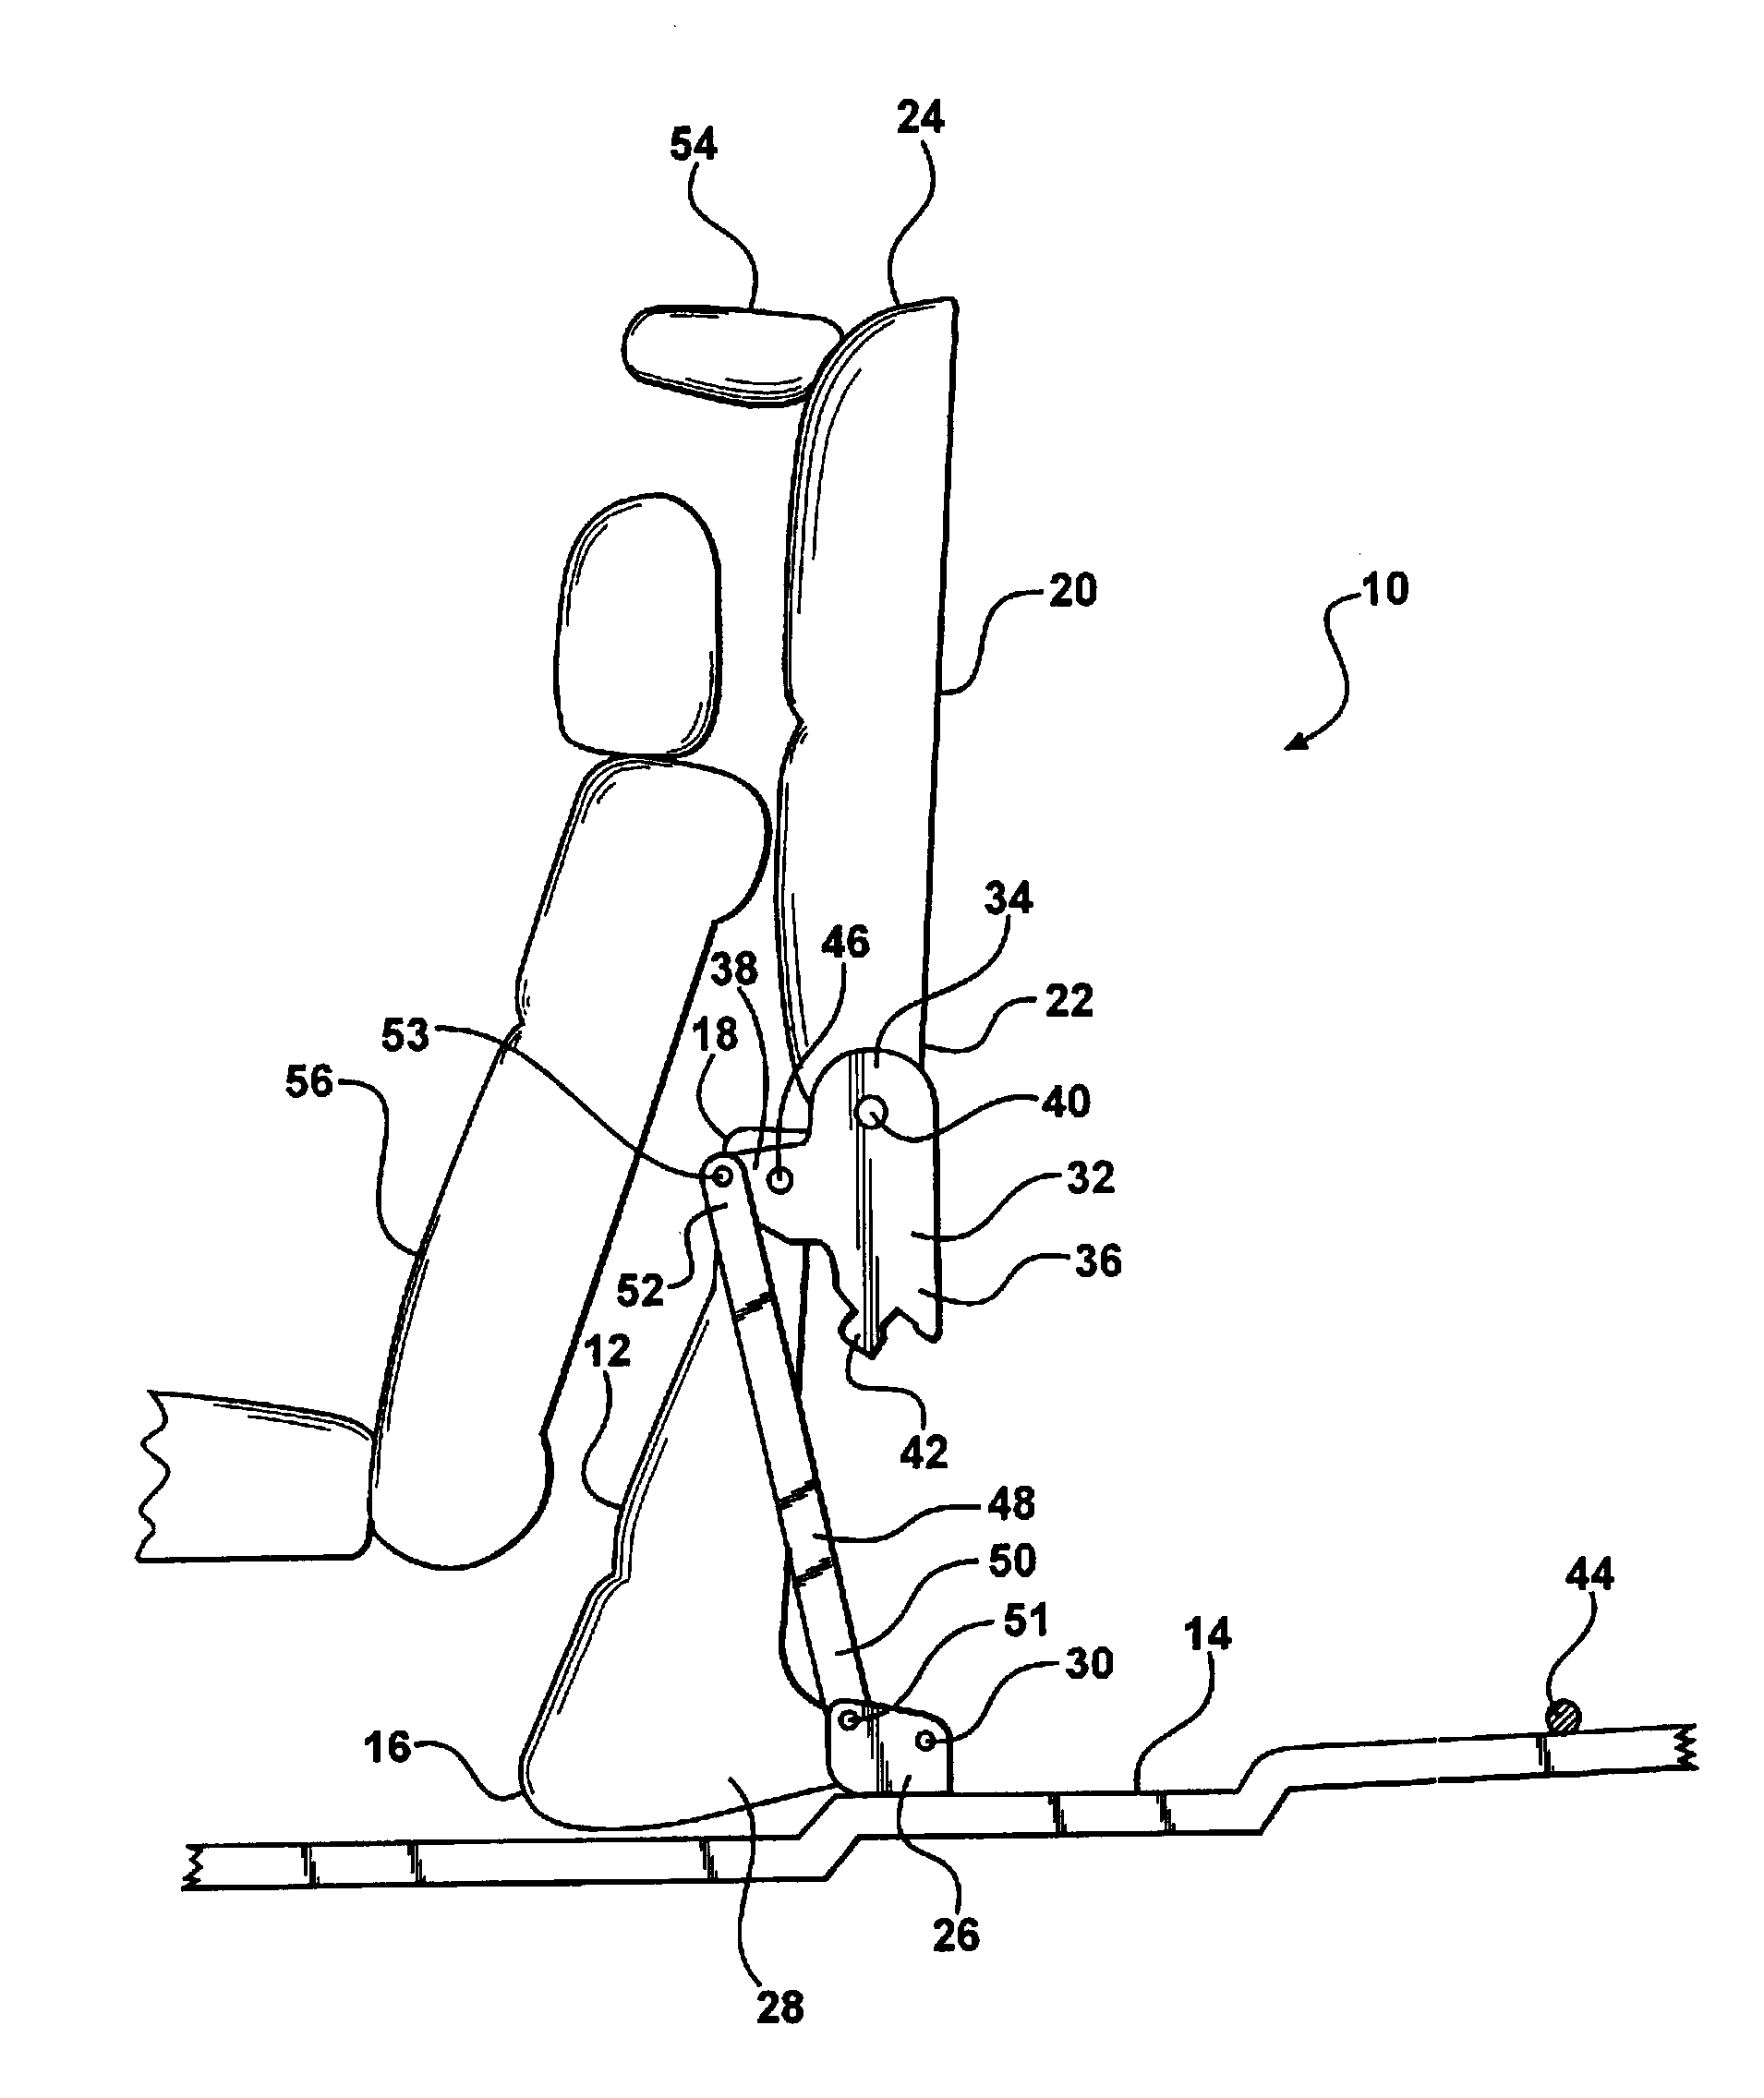 Stand Up Seat Assembly with Retractable Rear Leg